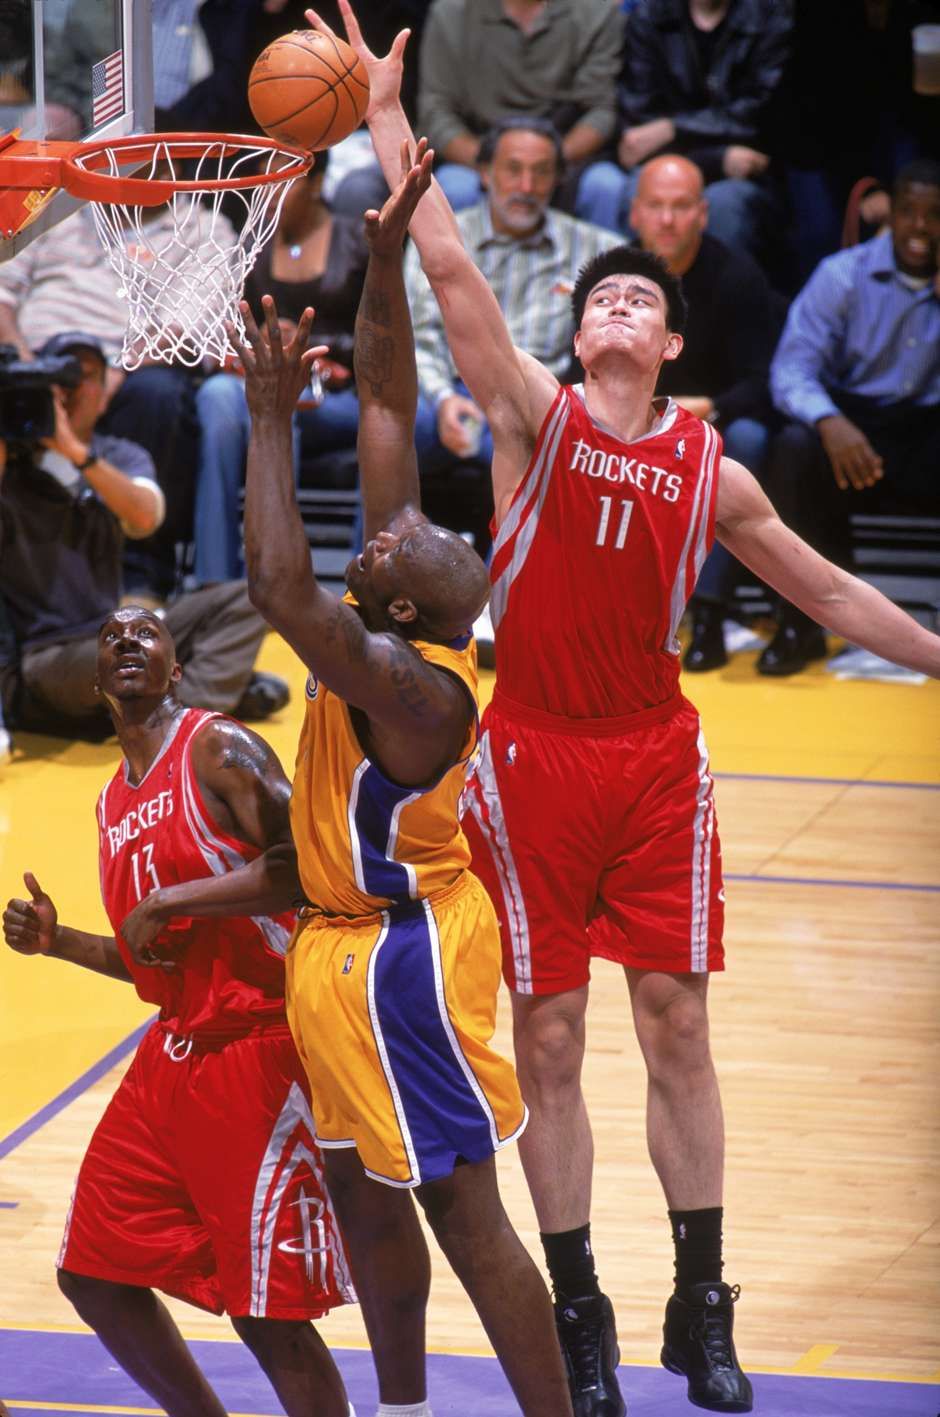 Happy birthday, Yao Ming! You were the first Asian to really battle Shaq, and for that, I thank you.  